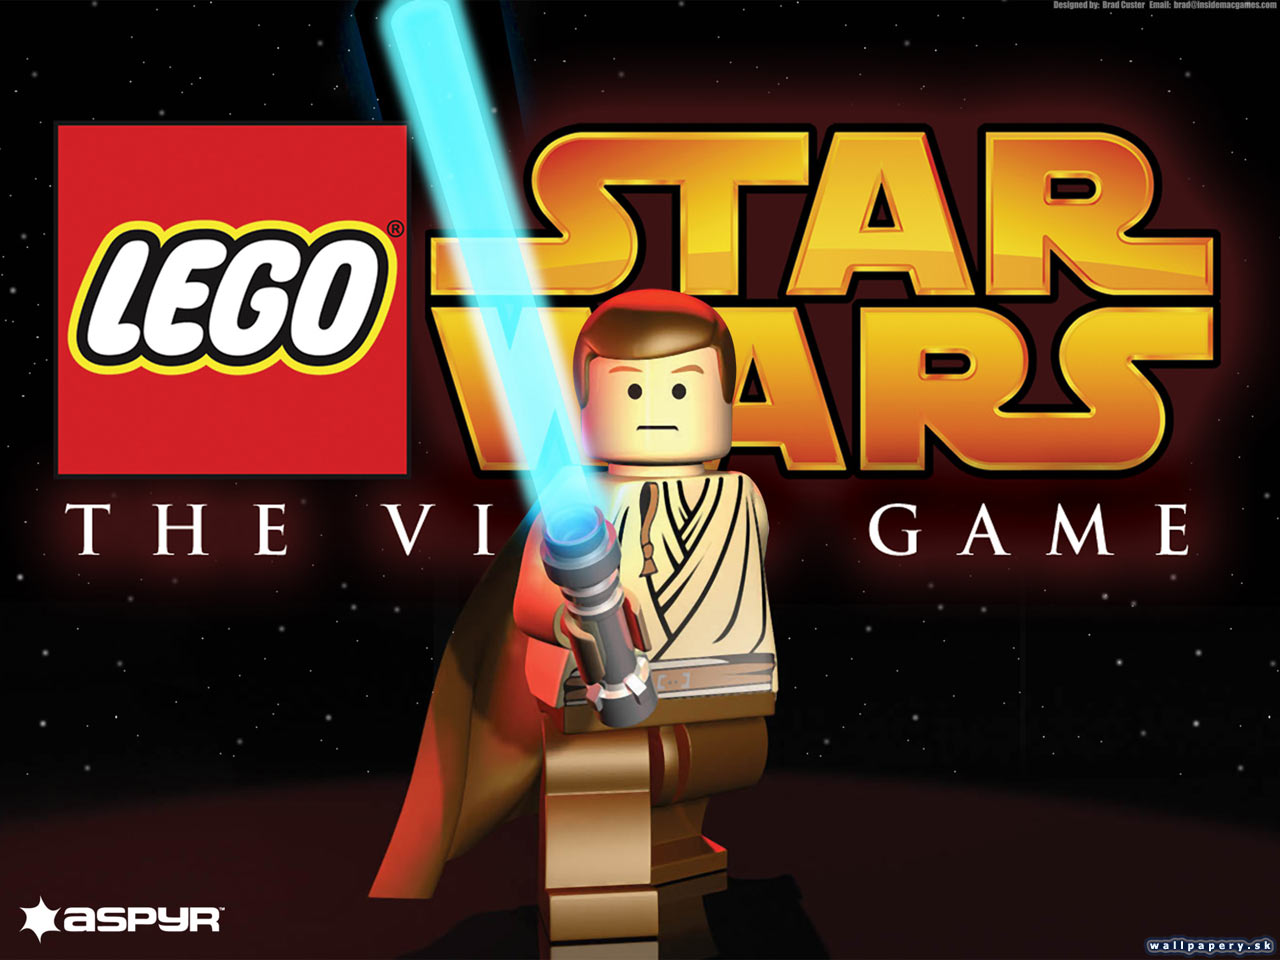 LEGO Star Wars: The Video Game - wallpaper 4